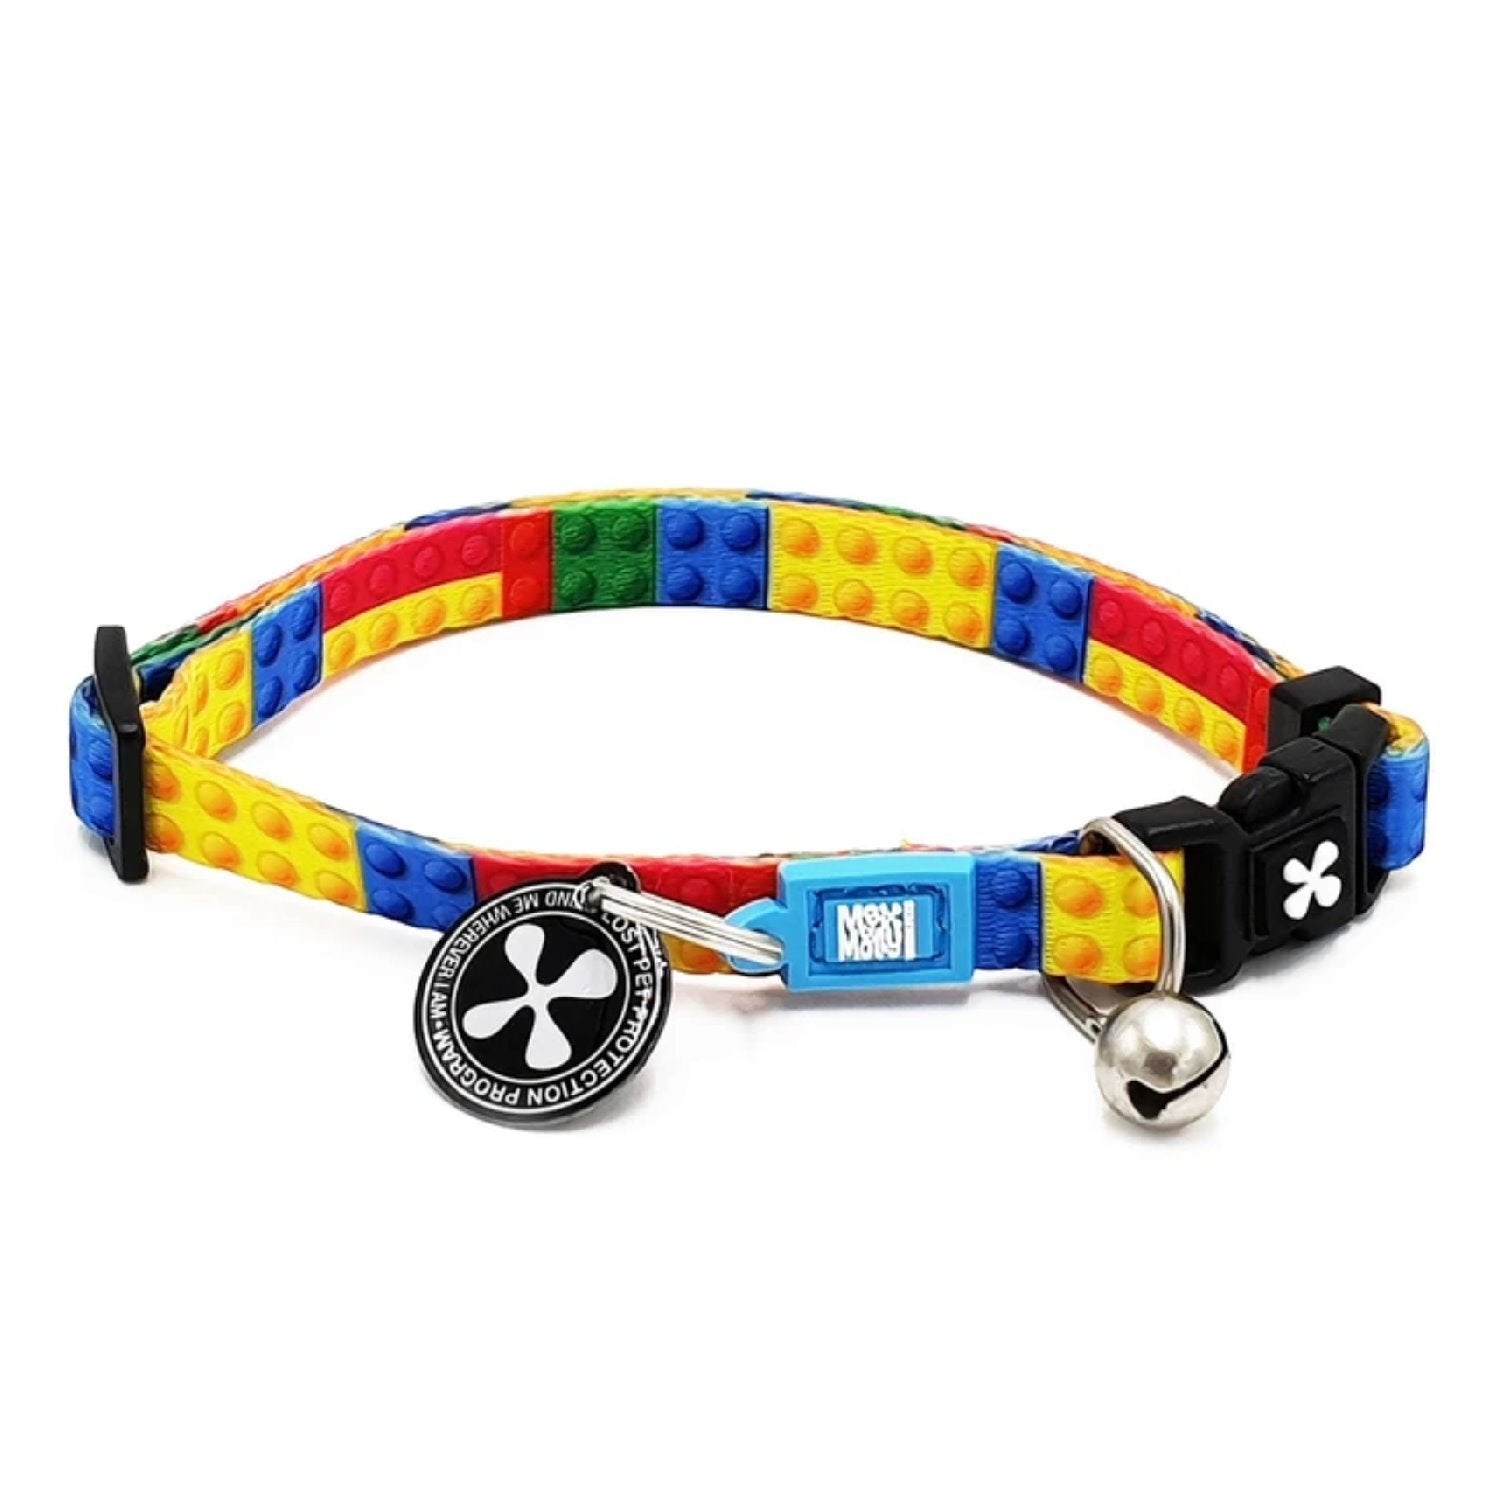 Max & Molly Smart ID Cat Collar - Playtime 2.0 - Pets and More